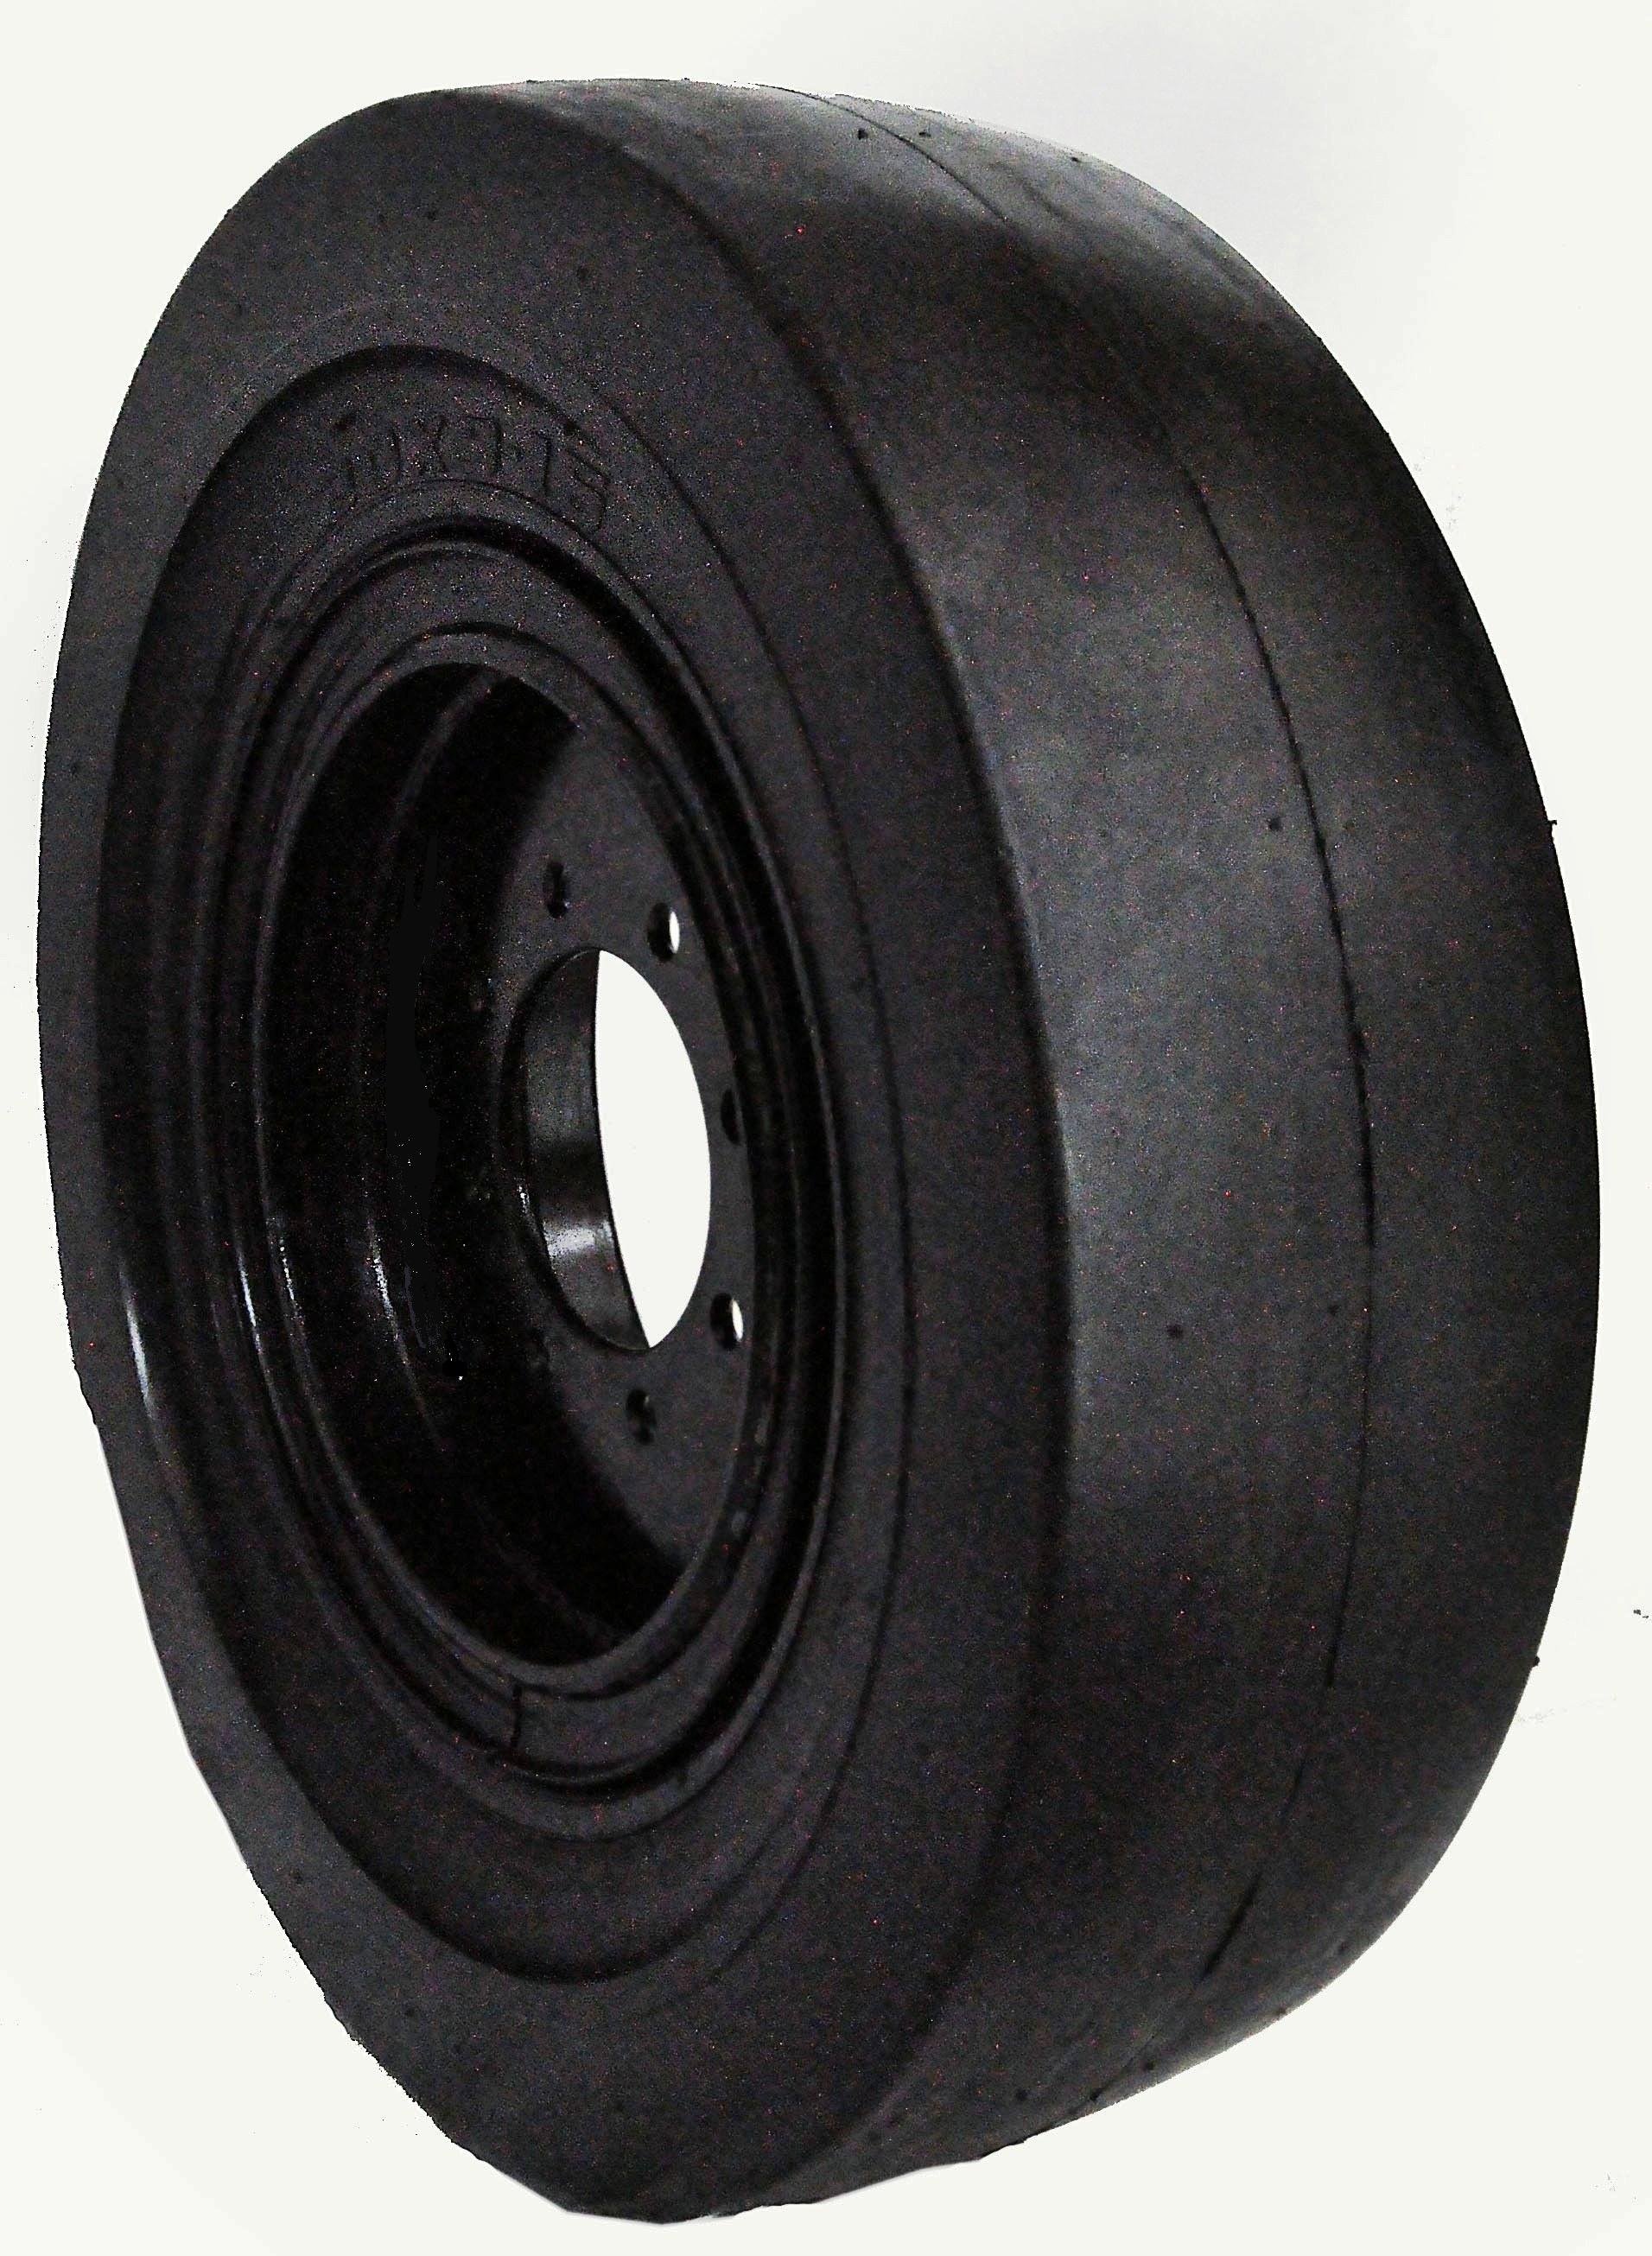 SD- Smooth Solid Skid Steer Tire